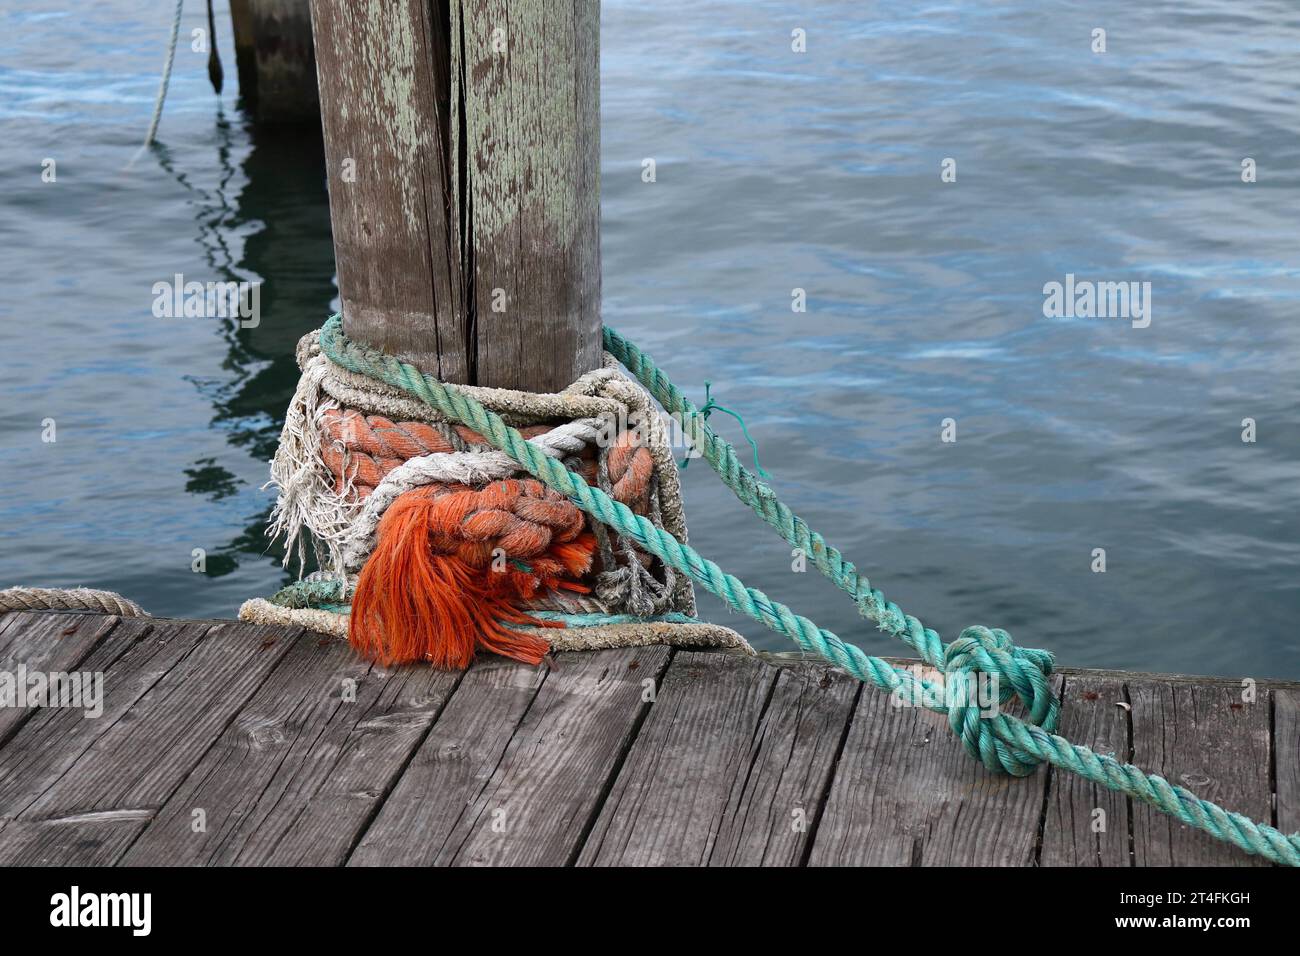 https://c8.alamy.com/comp/2T4FKGH/boating-pier-dock-piling-and-ropes-2T4FKGH.jpg